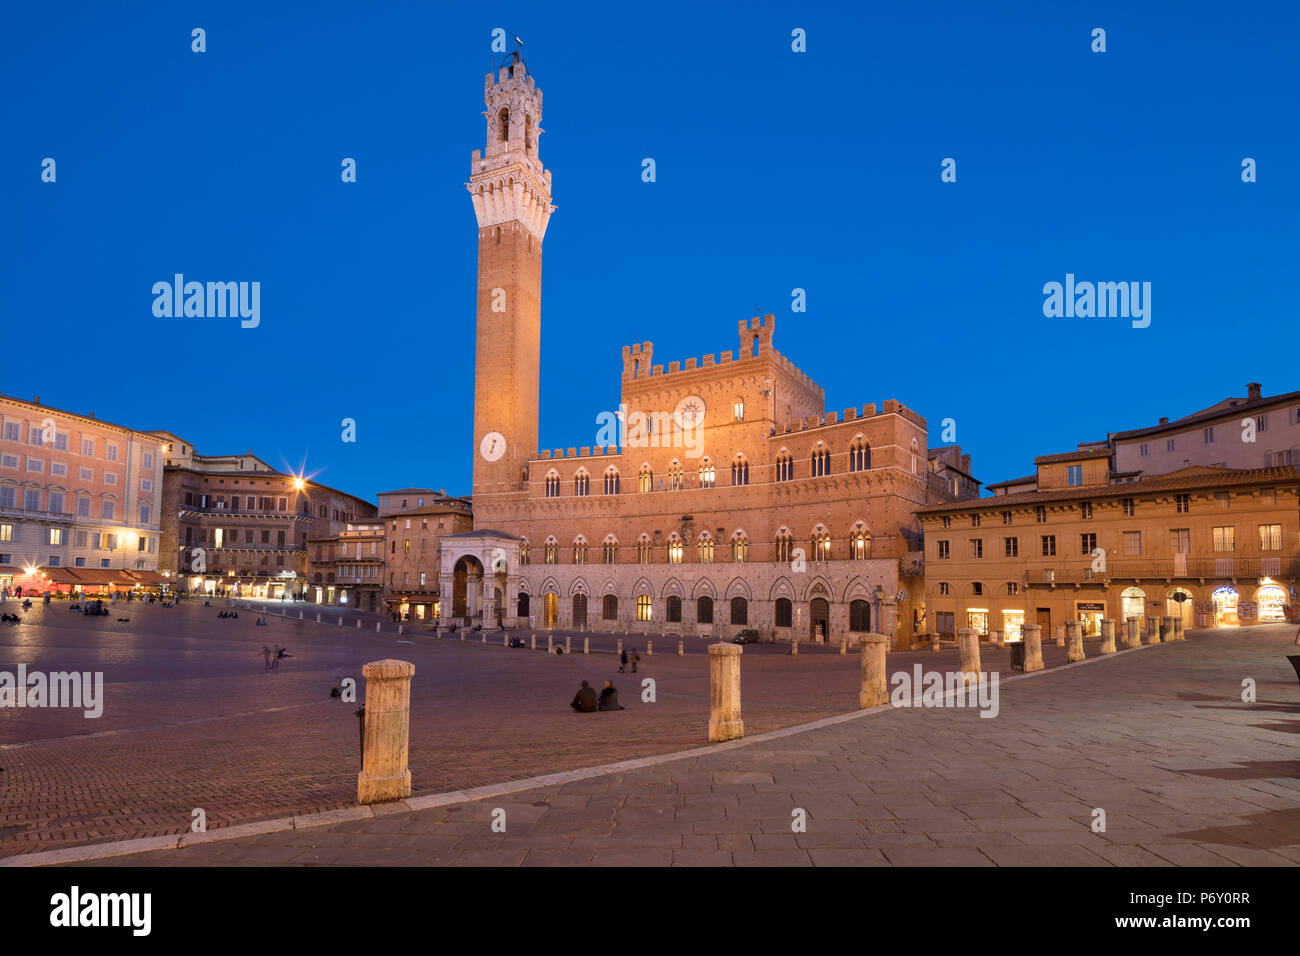 Palazzo Pubblico and Mangia's tower in Piazza del Campo at night, Siena, Tuscany, Italy Stock Photo